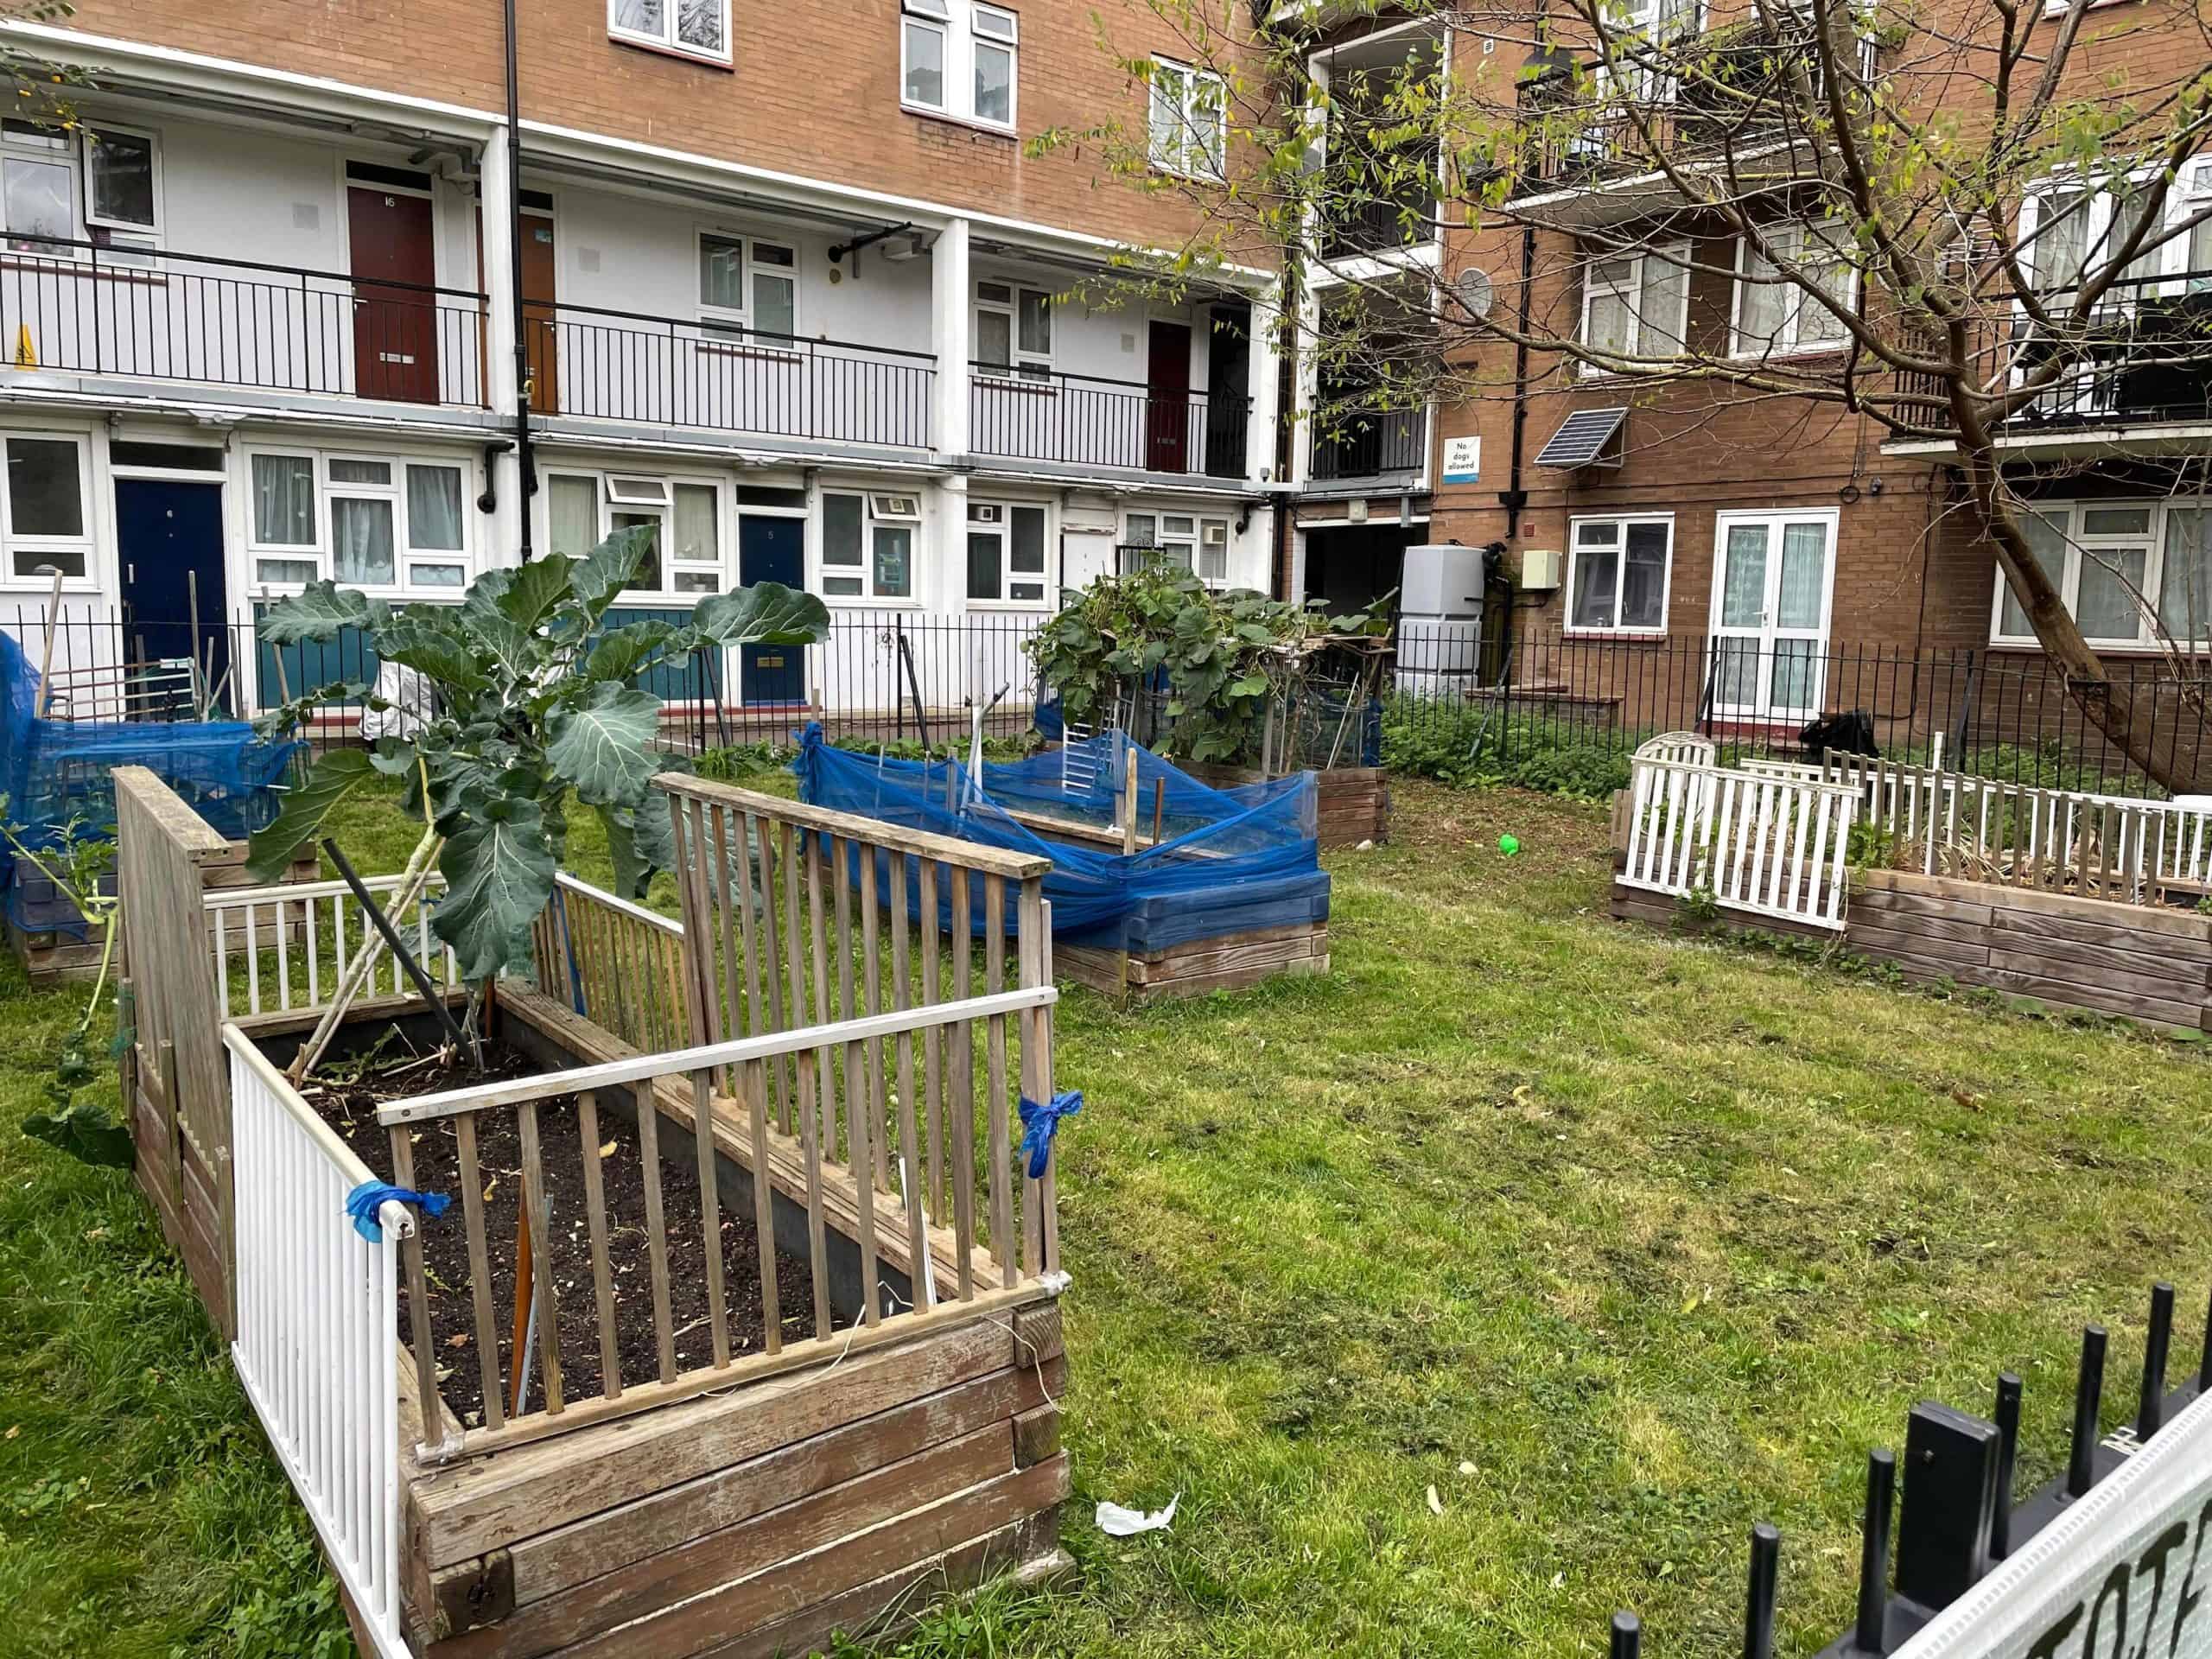 The residents currently use the space to grow things as well as let their children outside